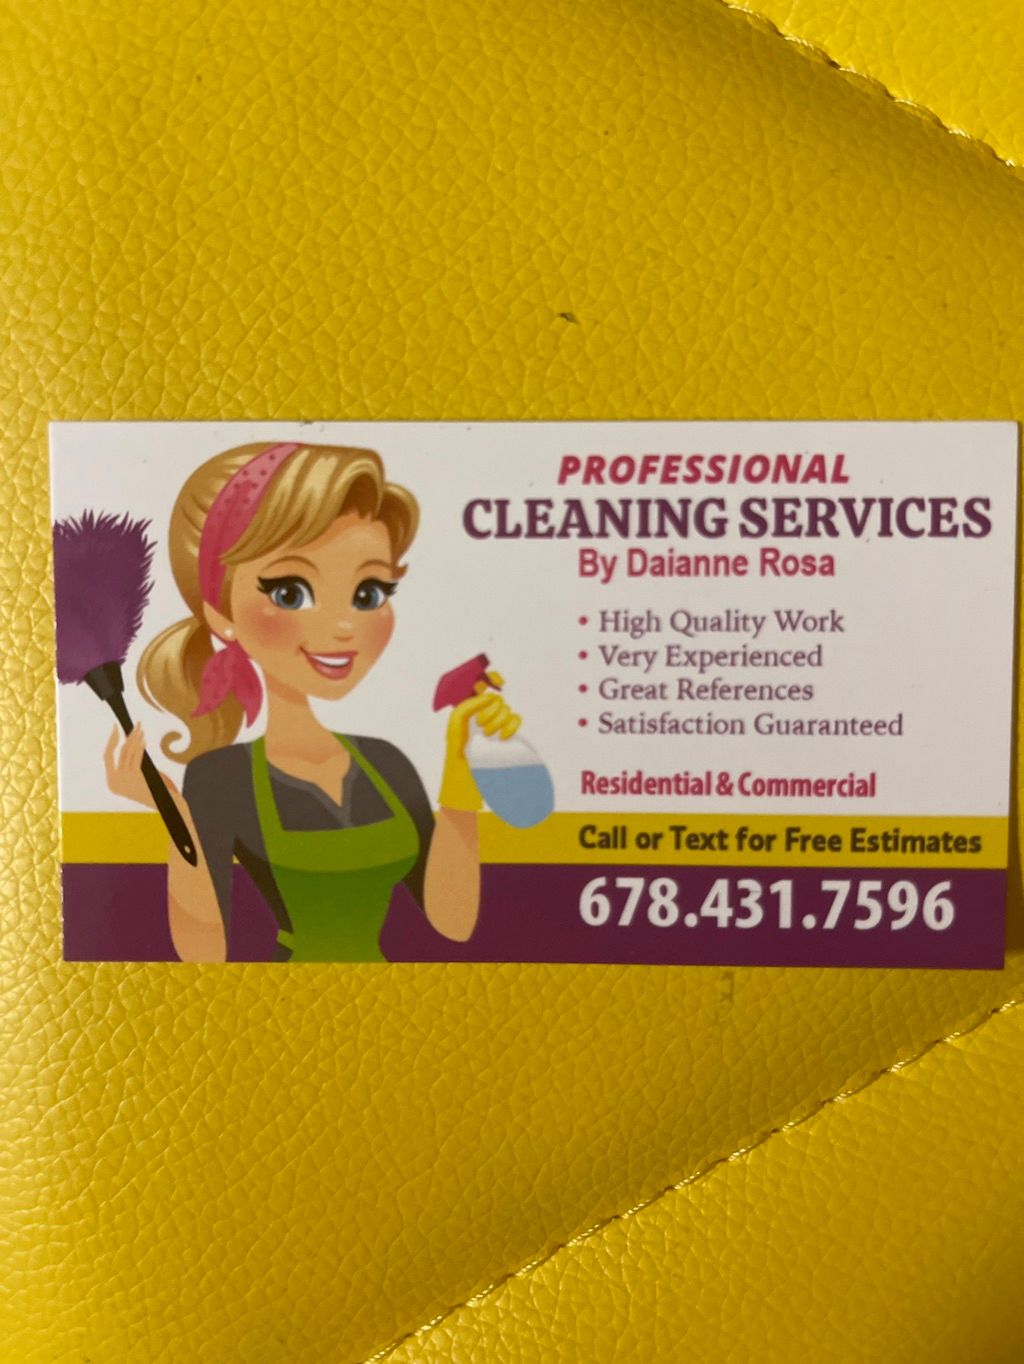 Rosa Cleaning Service